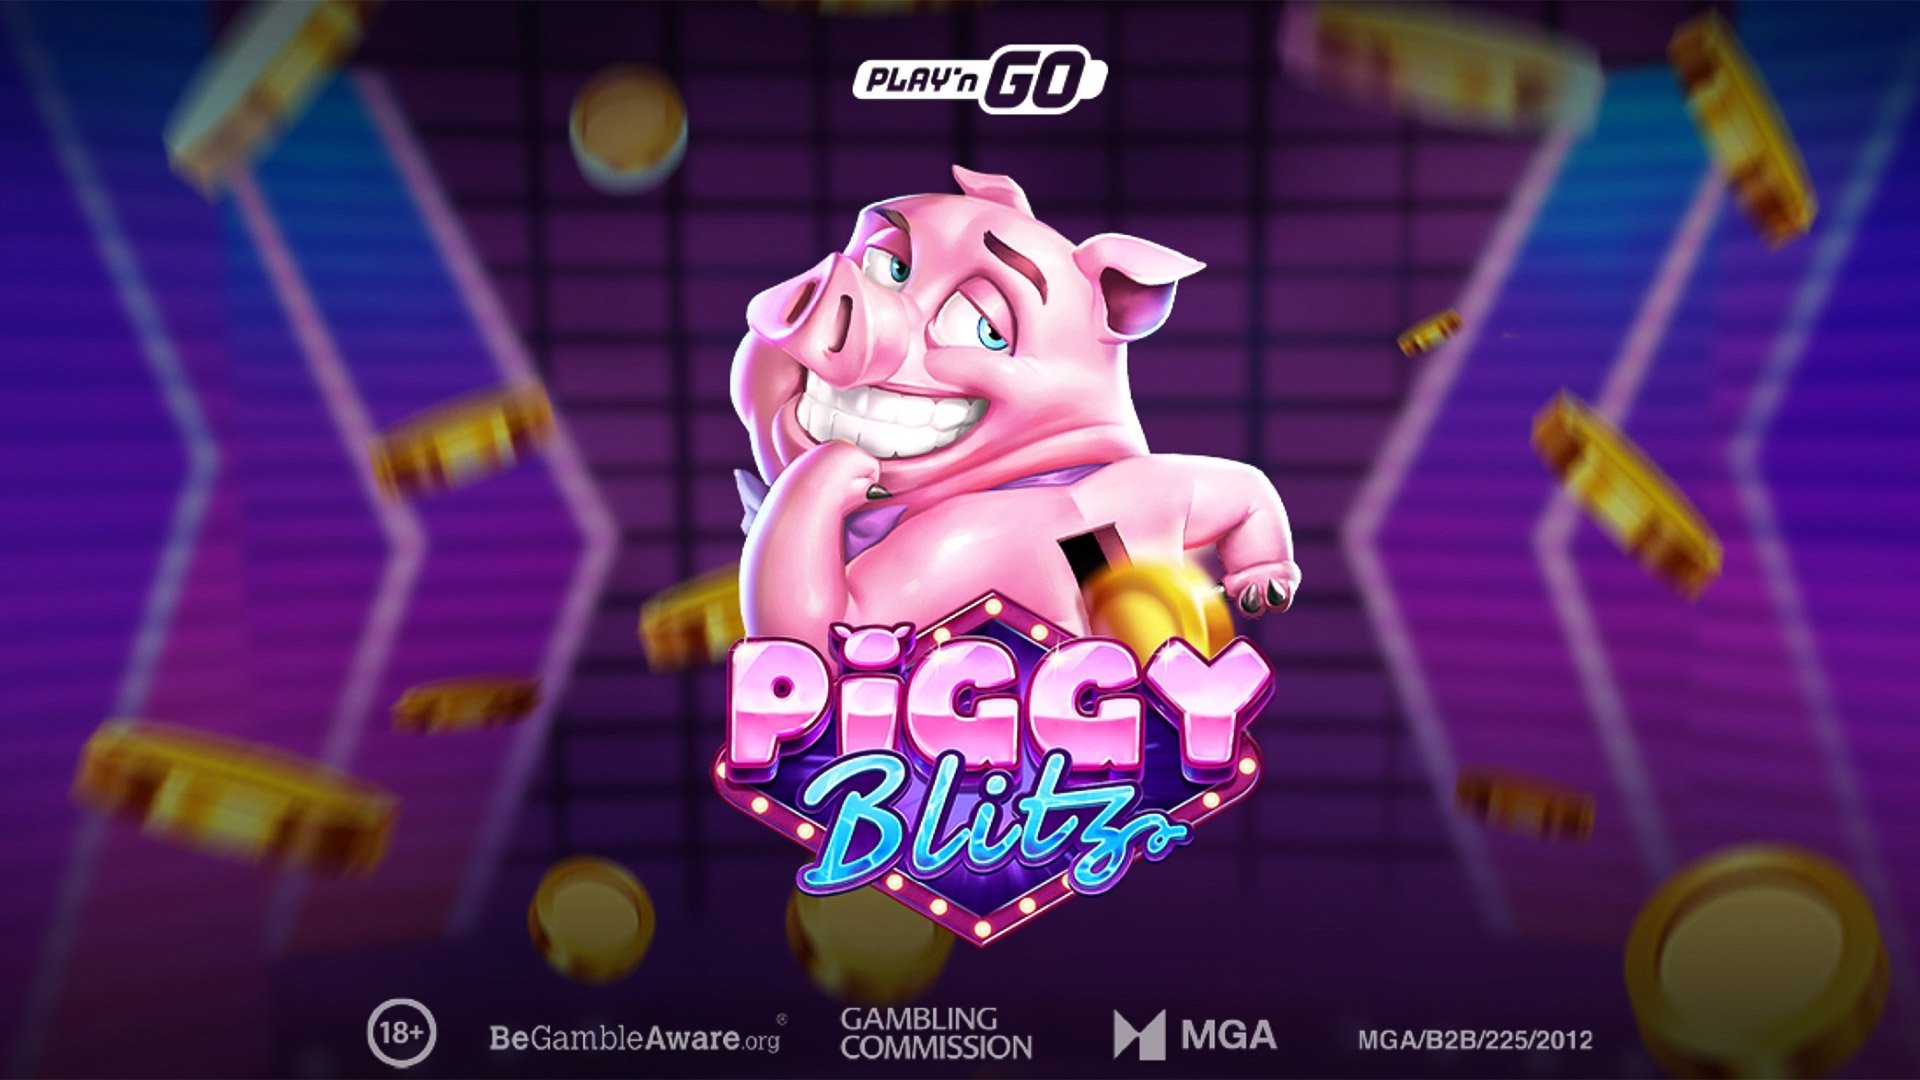 Play'n GO releases new animal-themed online slot Piggy Blitz featuring gameshow-style visuals